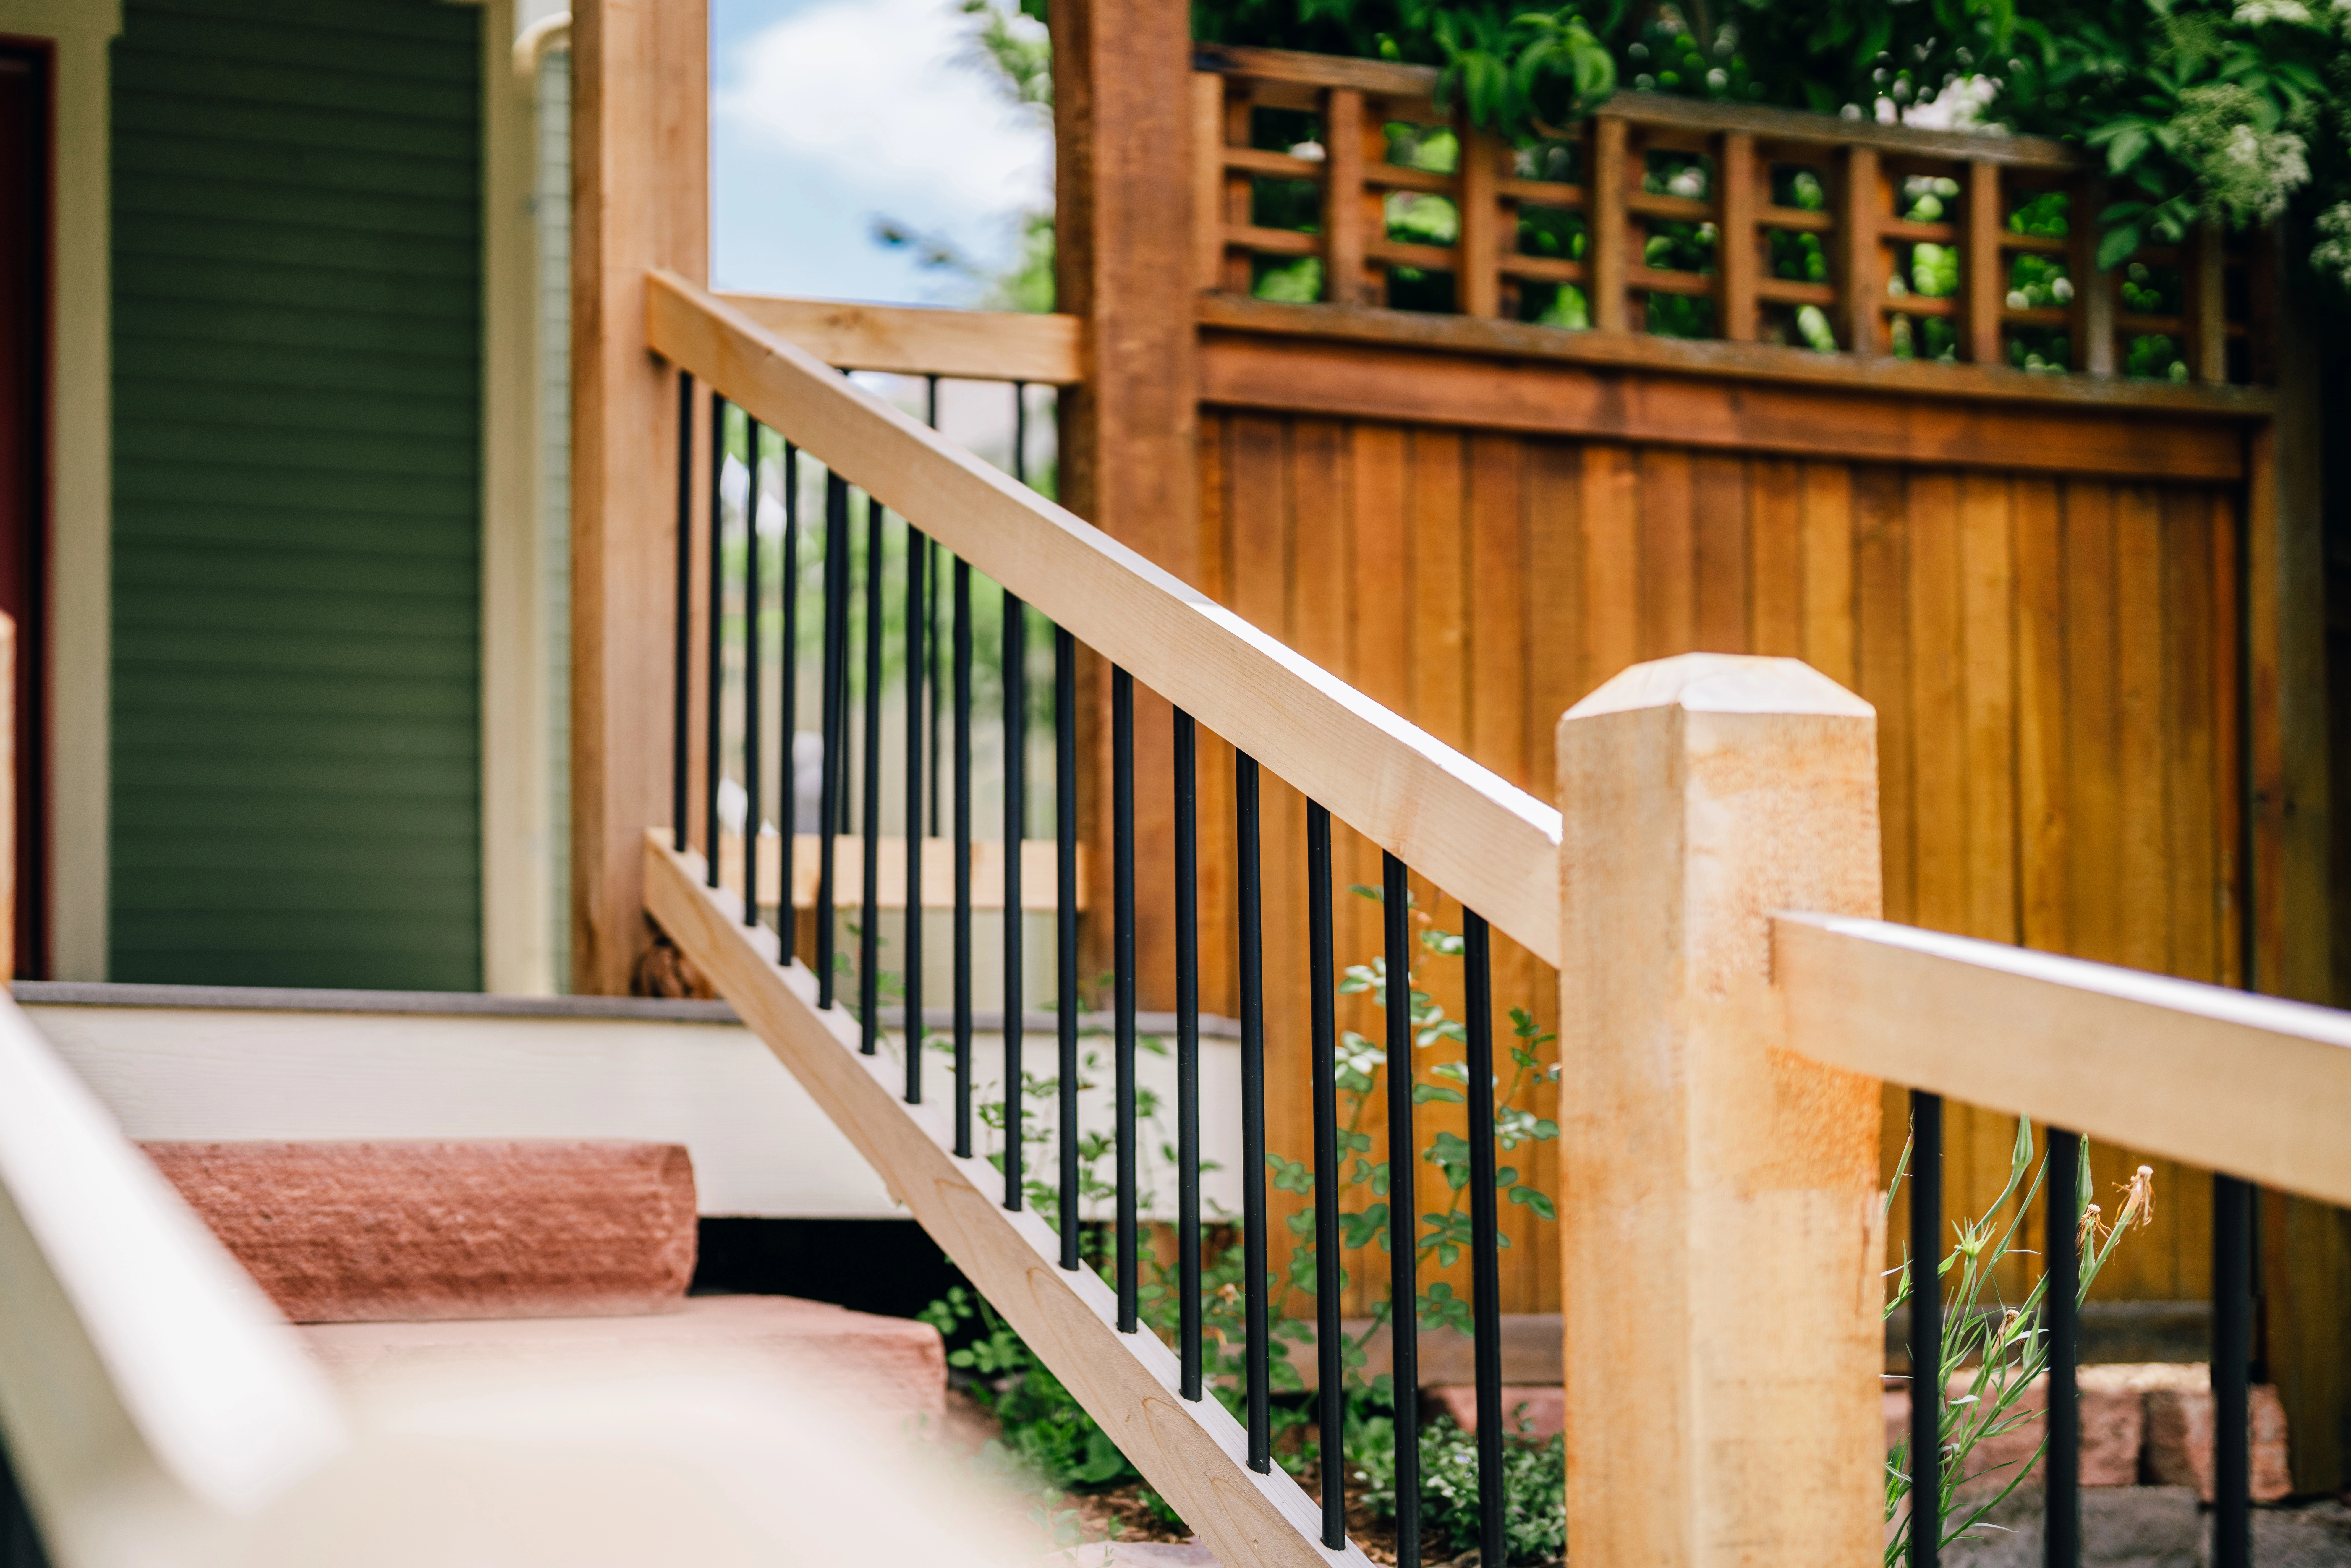 Close-up of unstained light wood exterior railing leading up front steps to a deck.